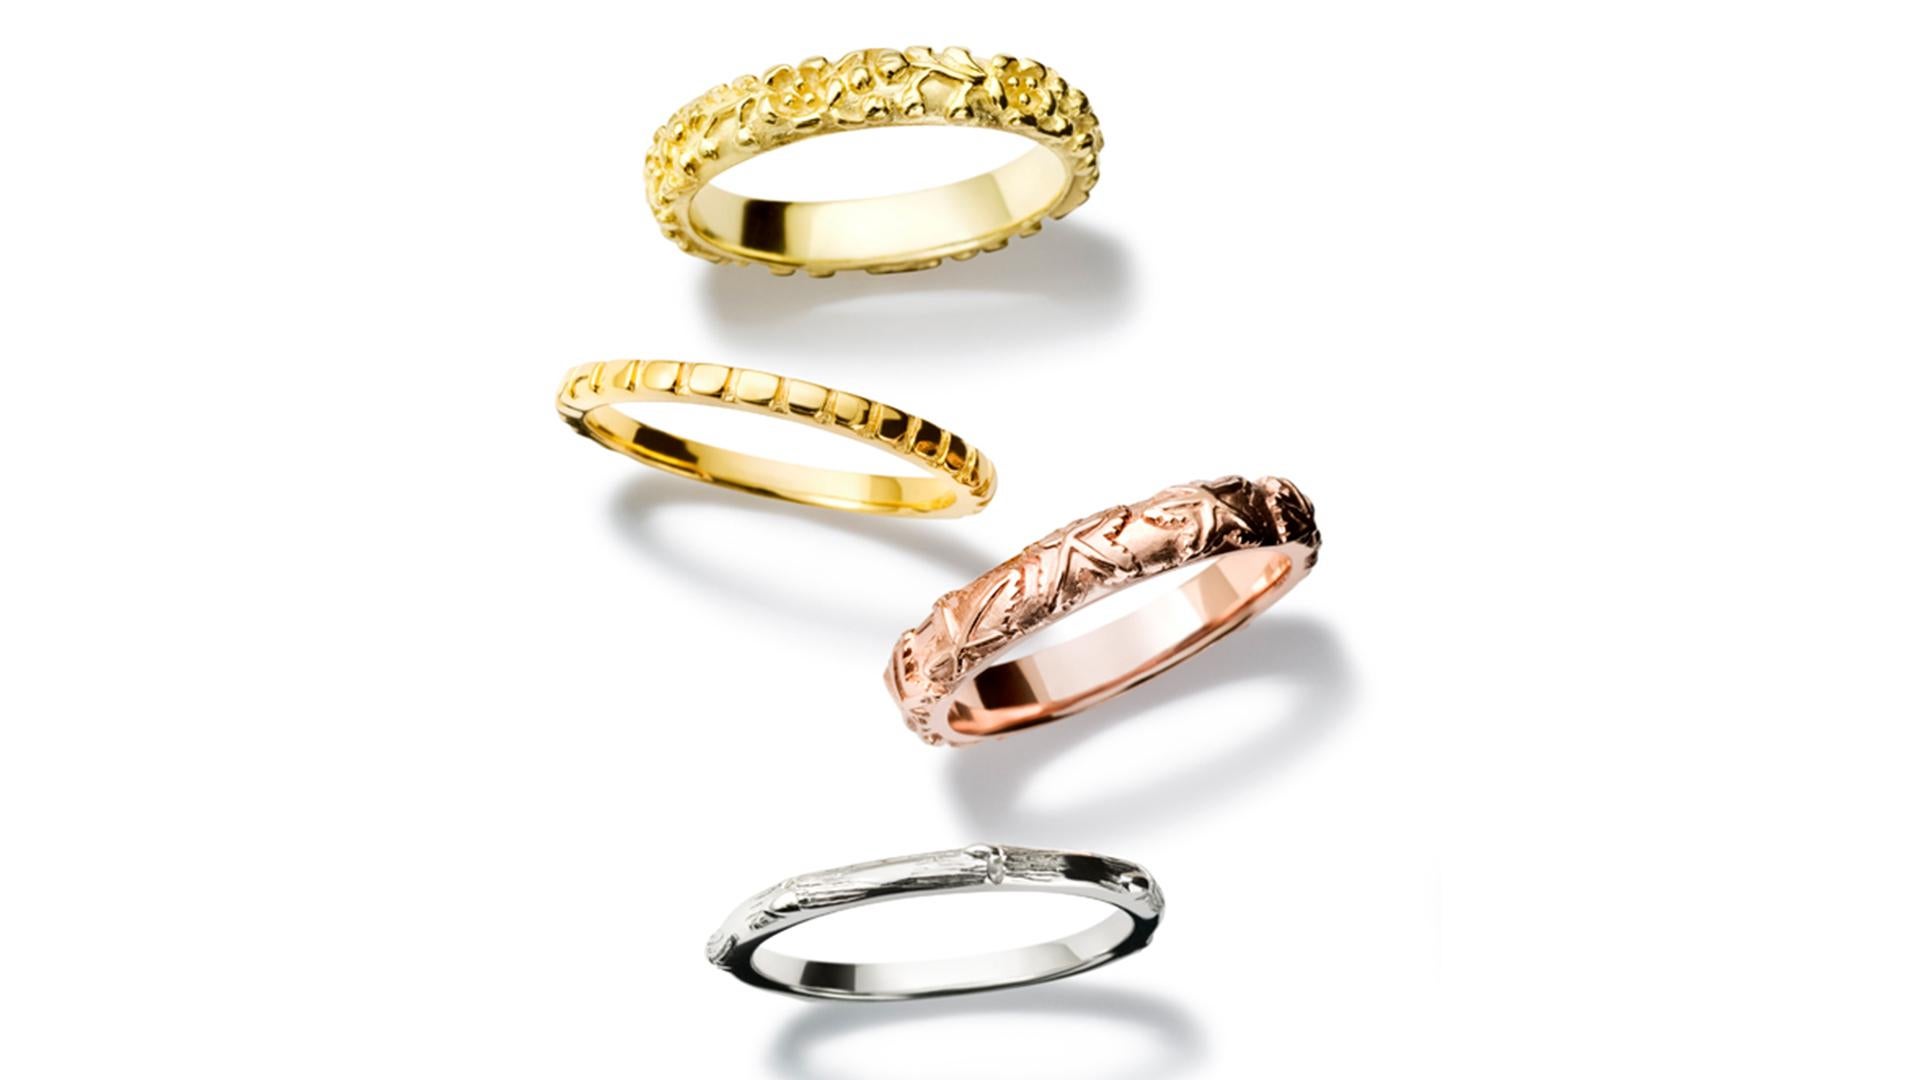 Four Seasons stack ring in 18 carat yellow, white, rose gold. Inspired by the traditional Japanese themes for the Four Seasons : with Spring symbolized by Plum blossom, Chrysanthemum flowers for Summer, Maple leaves for Autumn & Bamboo for Winter.